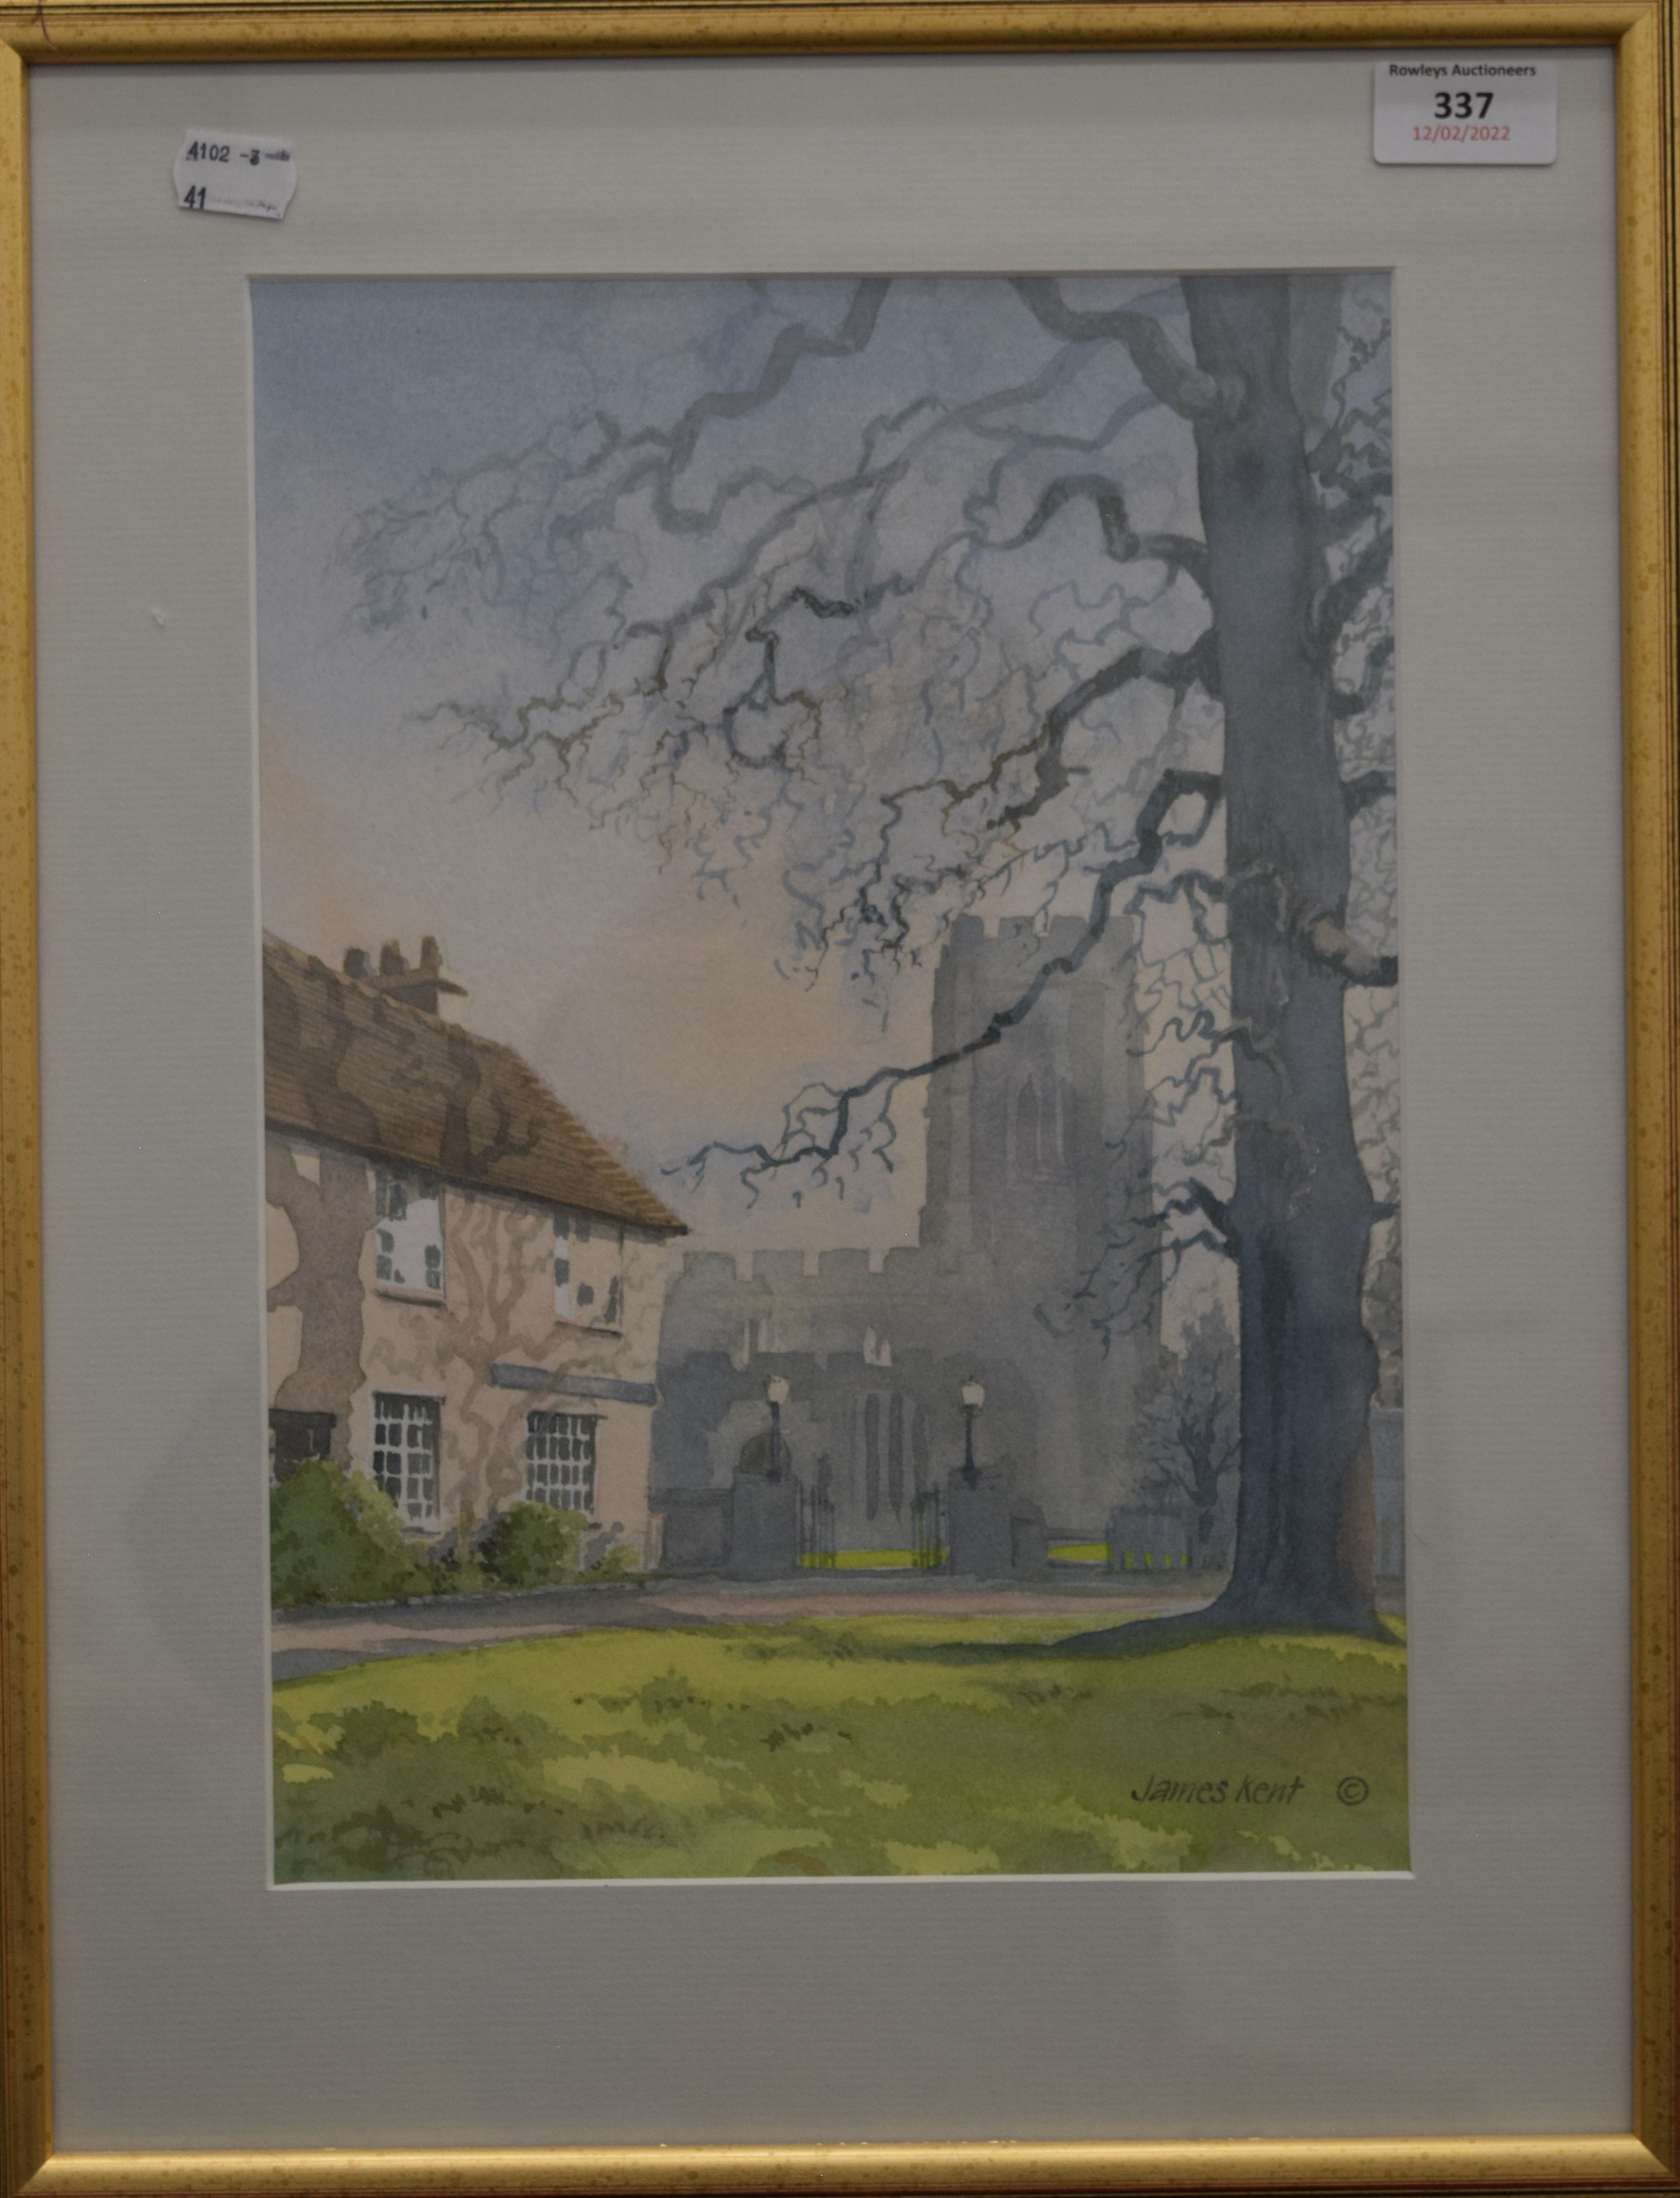 JAMES KENT (20th/21st century) British, Stoke-by-Clare Church, watercolour, framed and glazed. 23. - Image 2 of 3